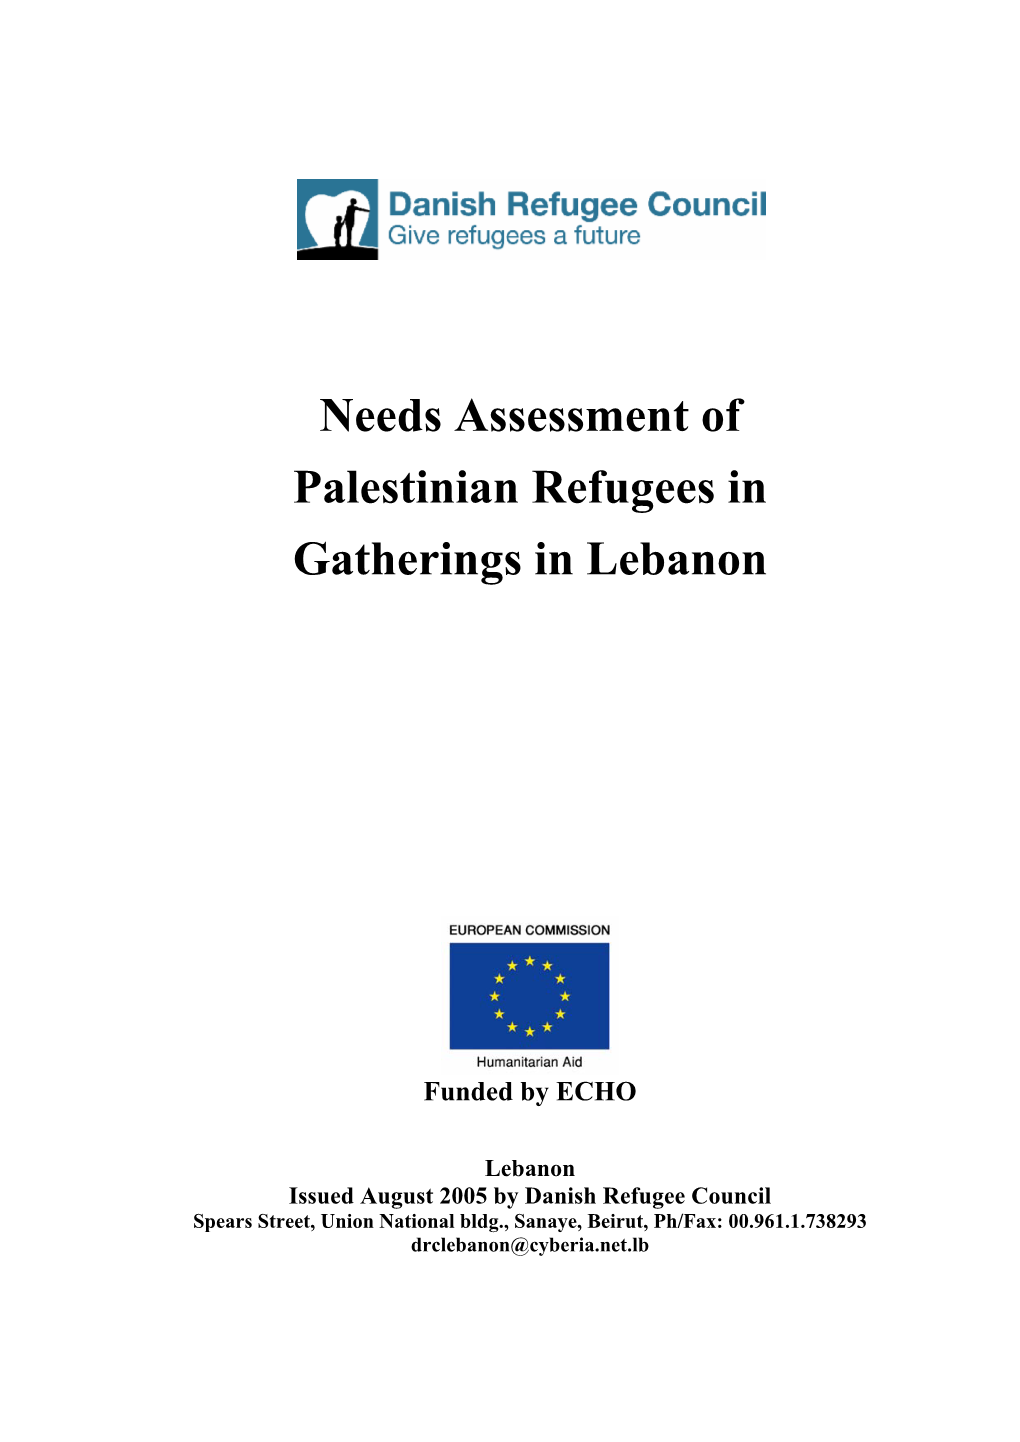 Needs Assessment of Palestinian Refugees in Gatherings in Lebanon